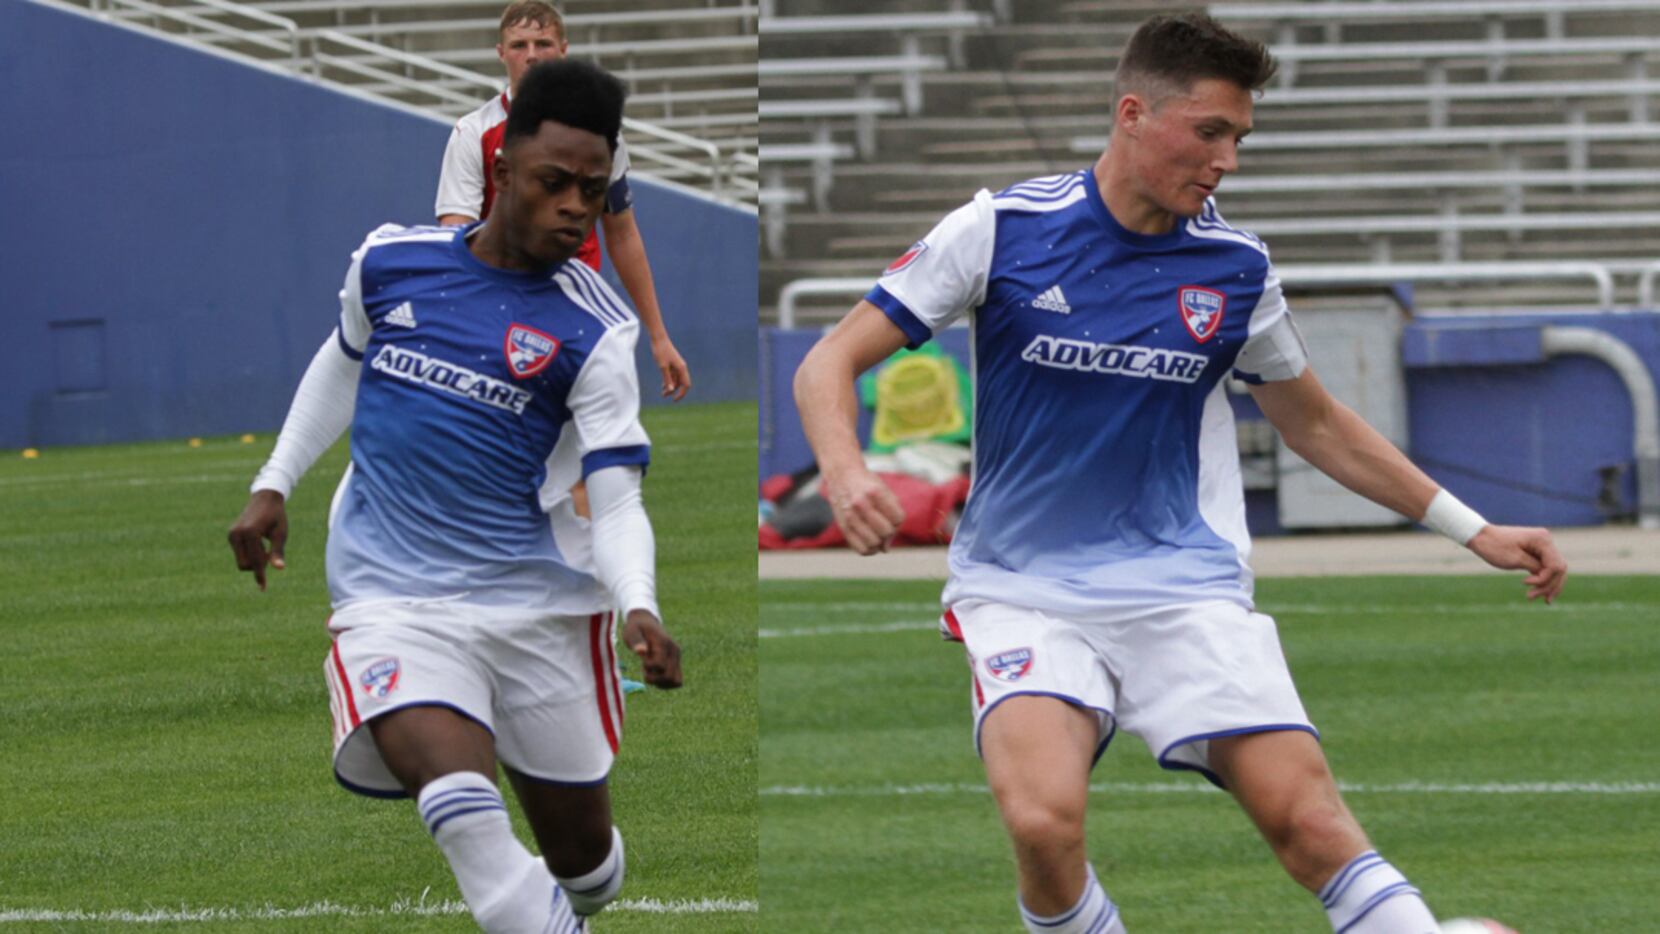 North Texas SC signs Damus and Evans